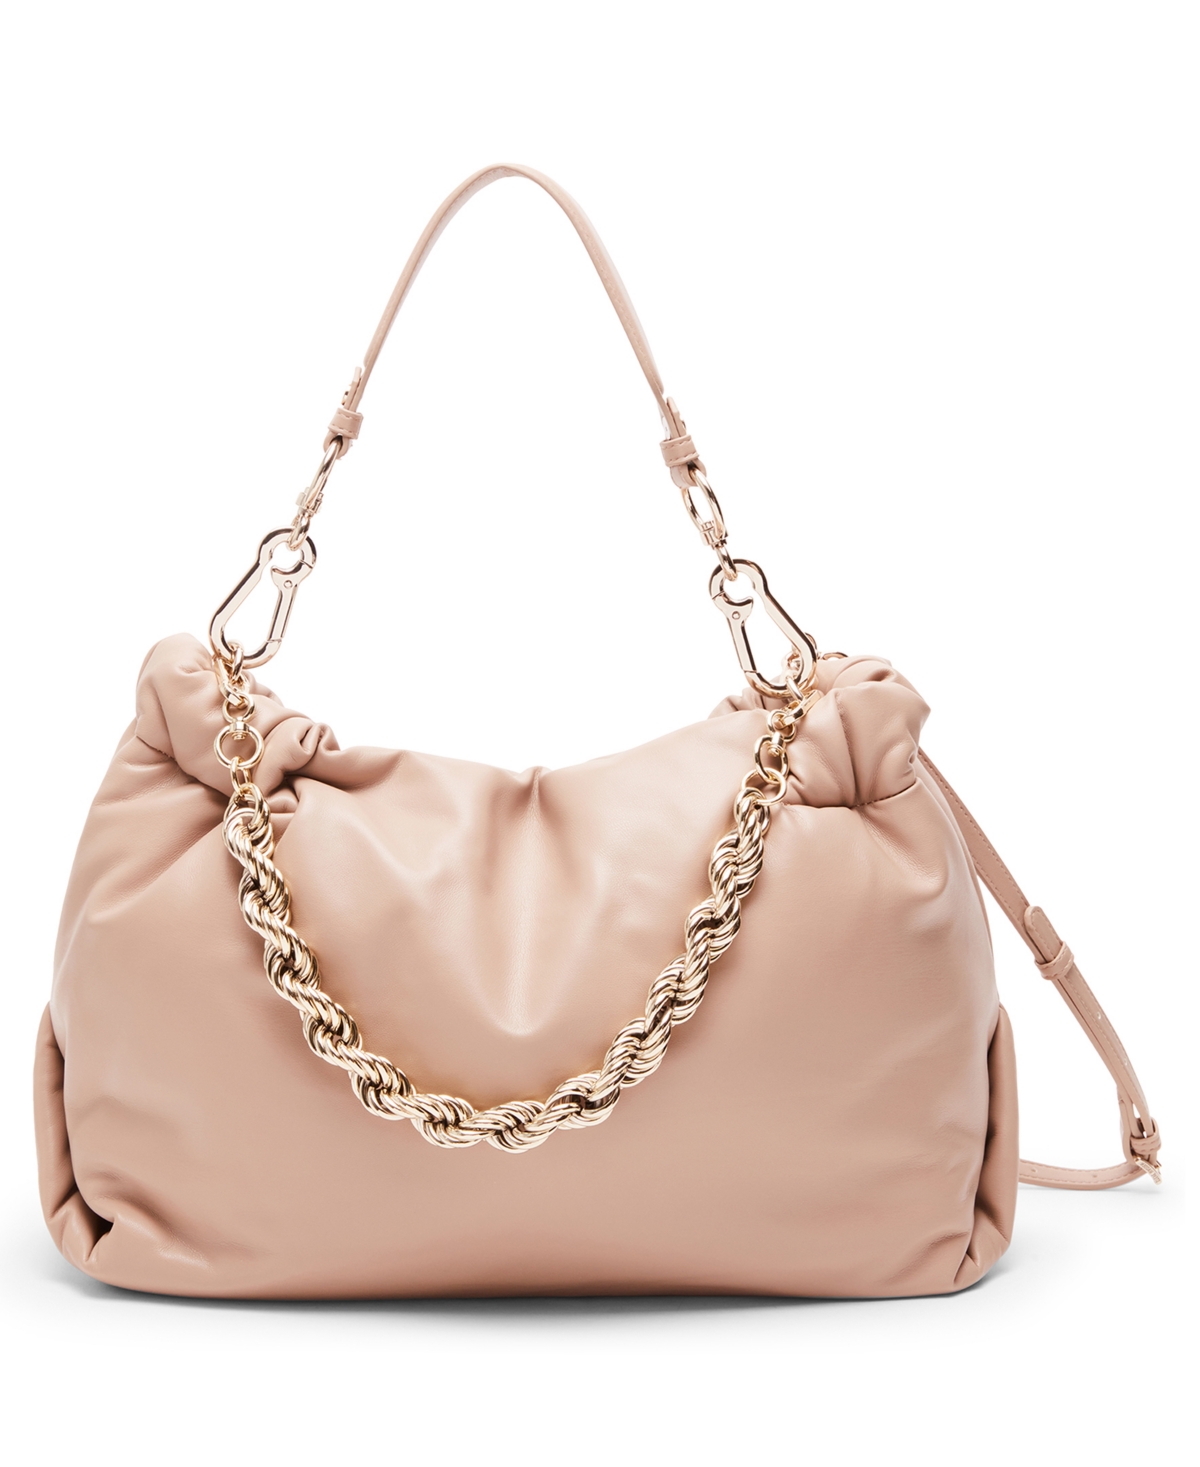 Steve Madden Remy Shoulder Bag With Chain In Nude